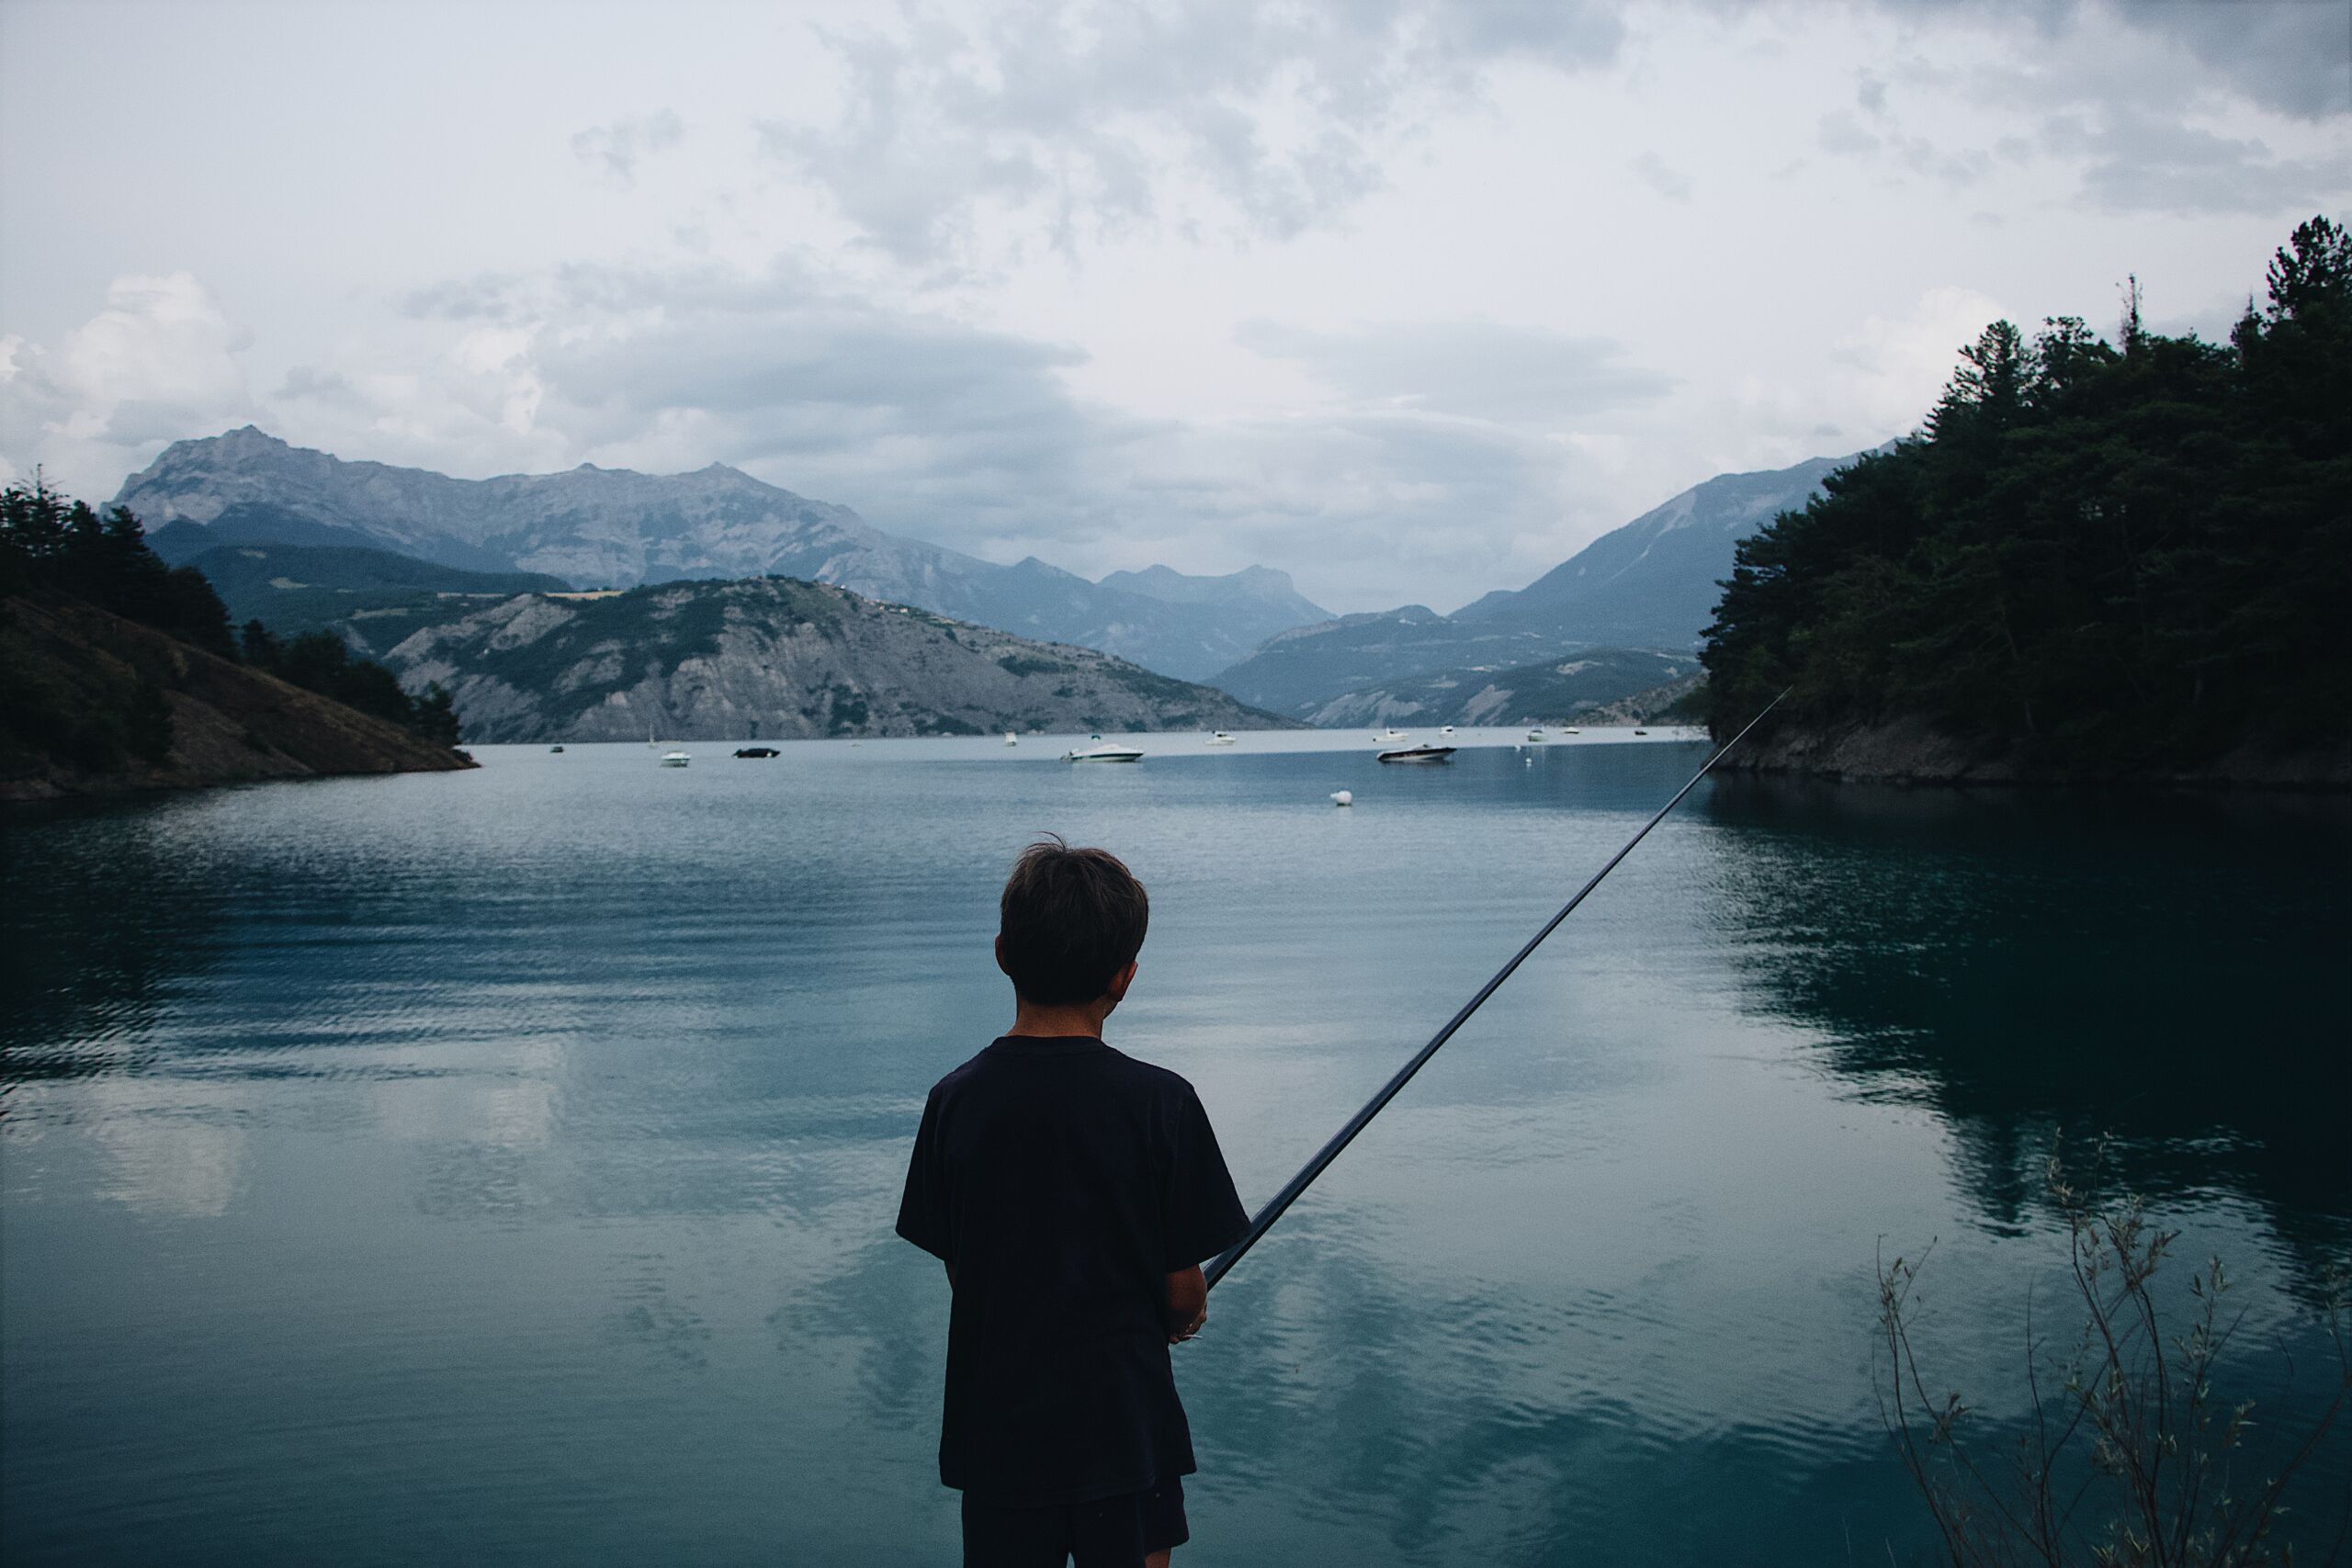 A boy fishing in the water with mountains behind him.